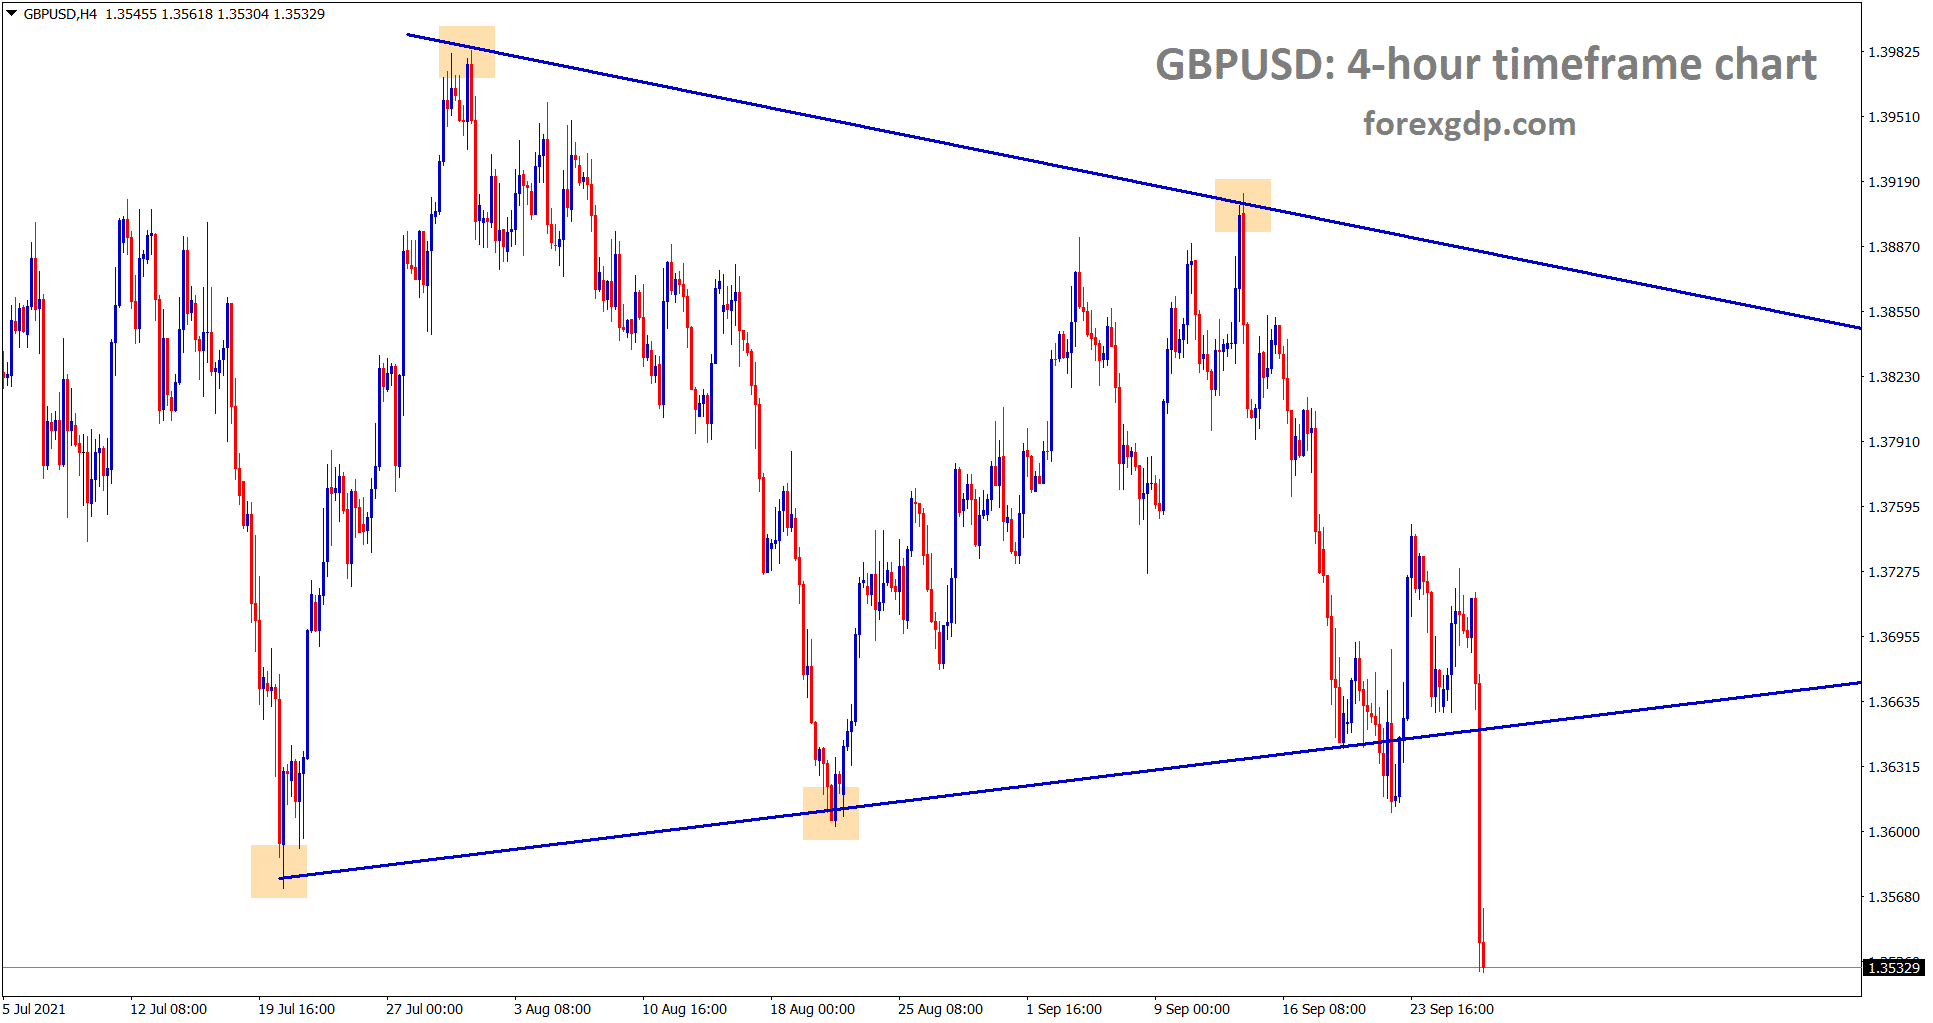 GBPUSD has made a strong breakout today from the symmetrical triangle pattern and also broken all the recent support levels